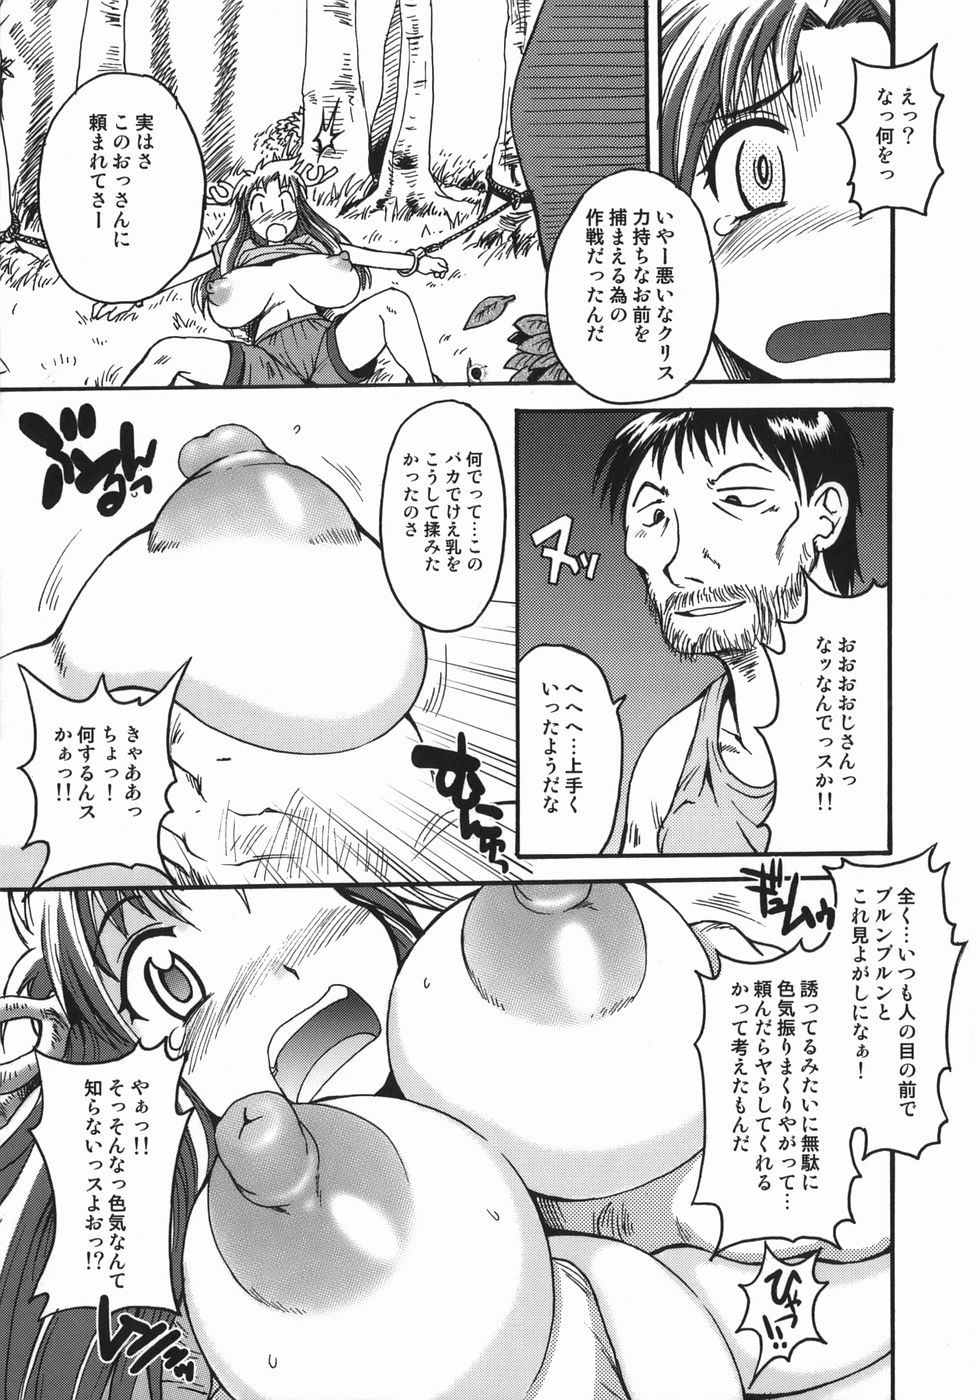 [Shimanto Youta] Chris Claus page 15 full